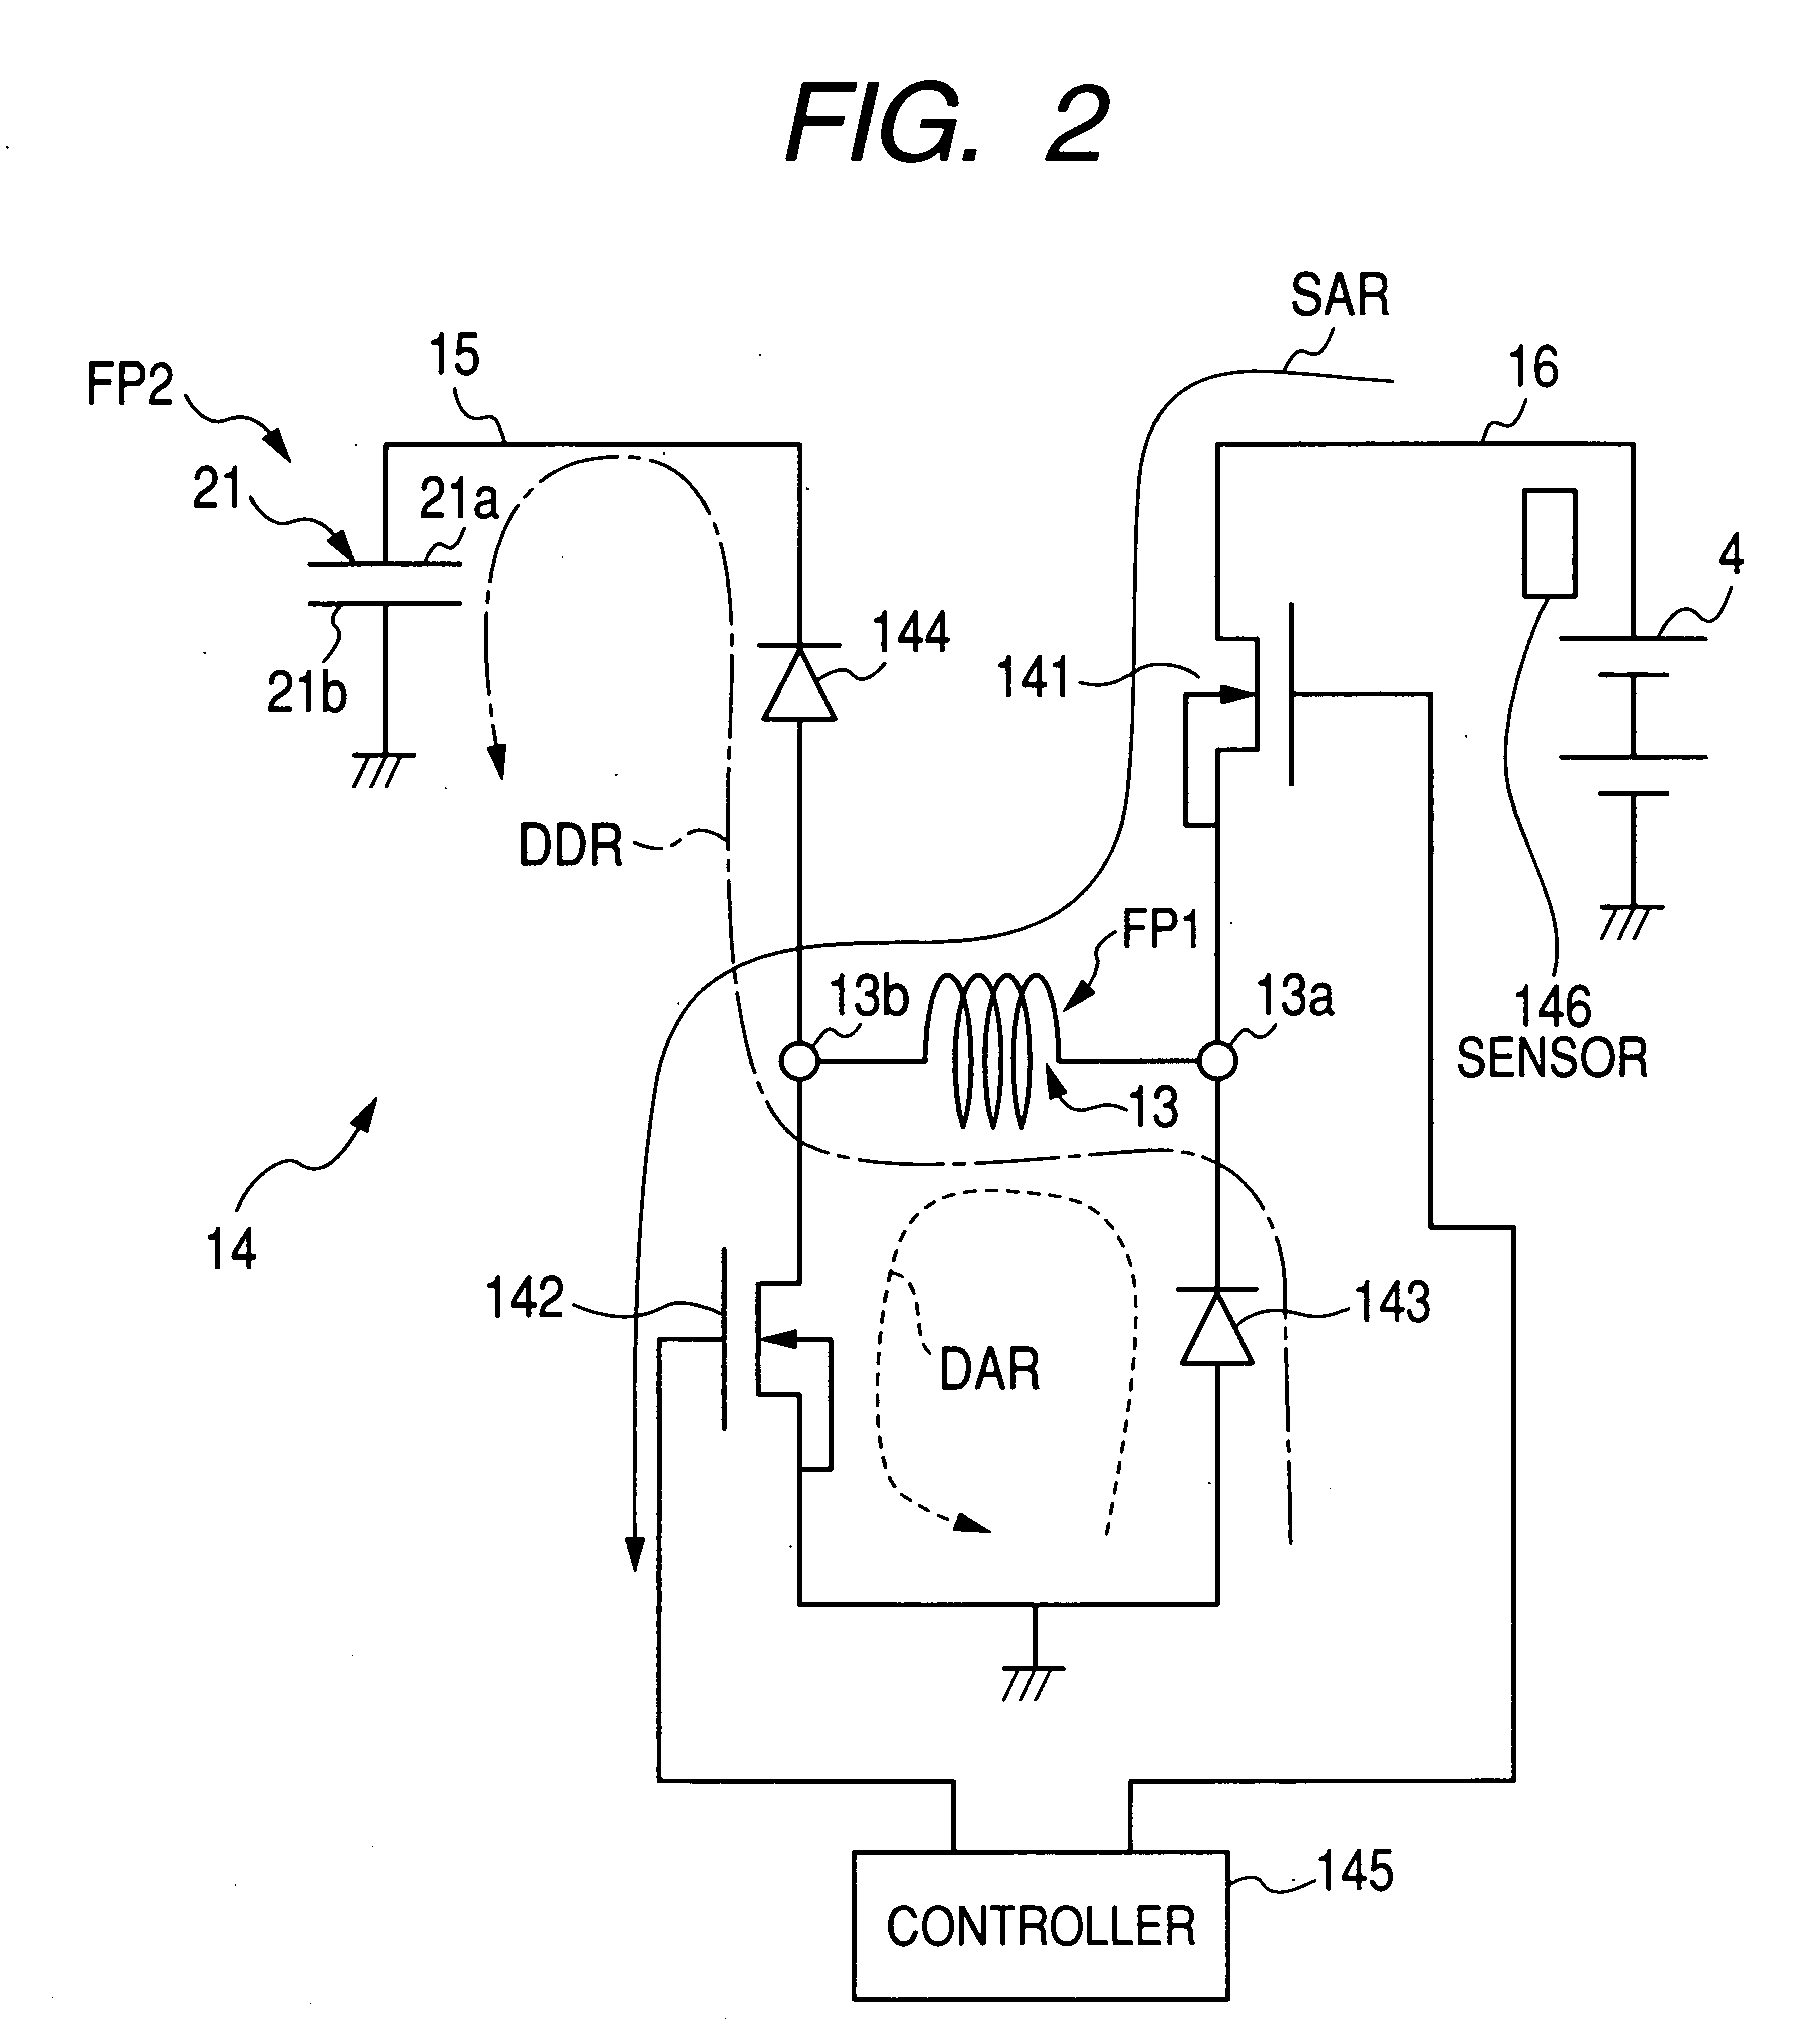 Power-generator control apparatus for addressing occurrence of voltage transient